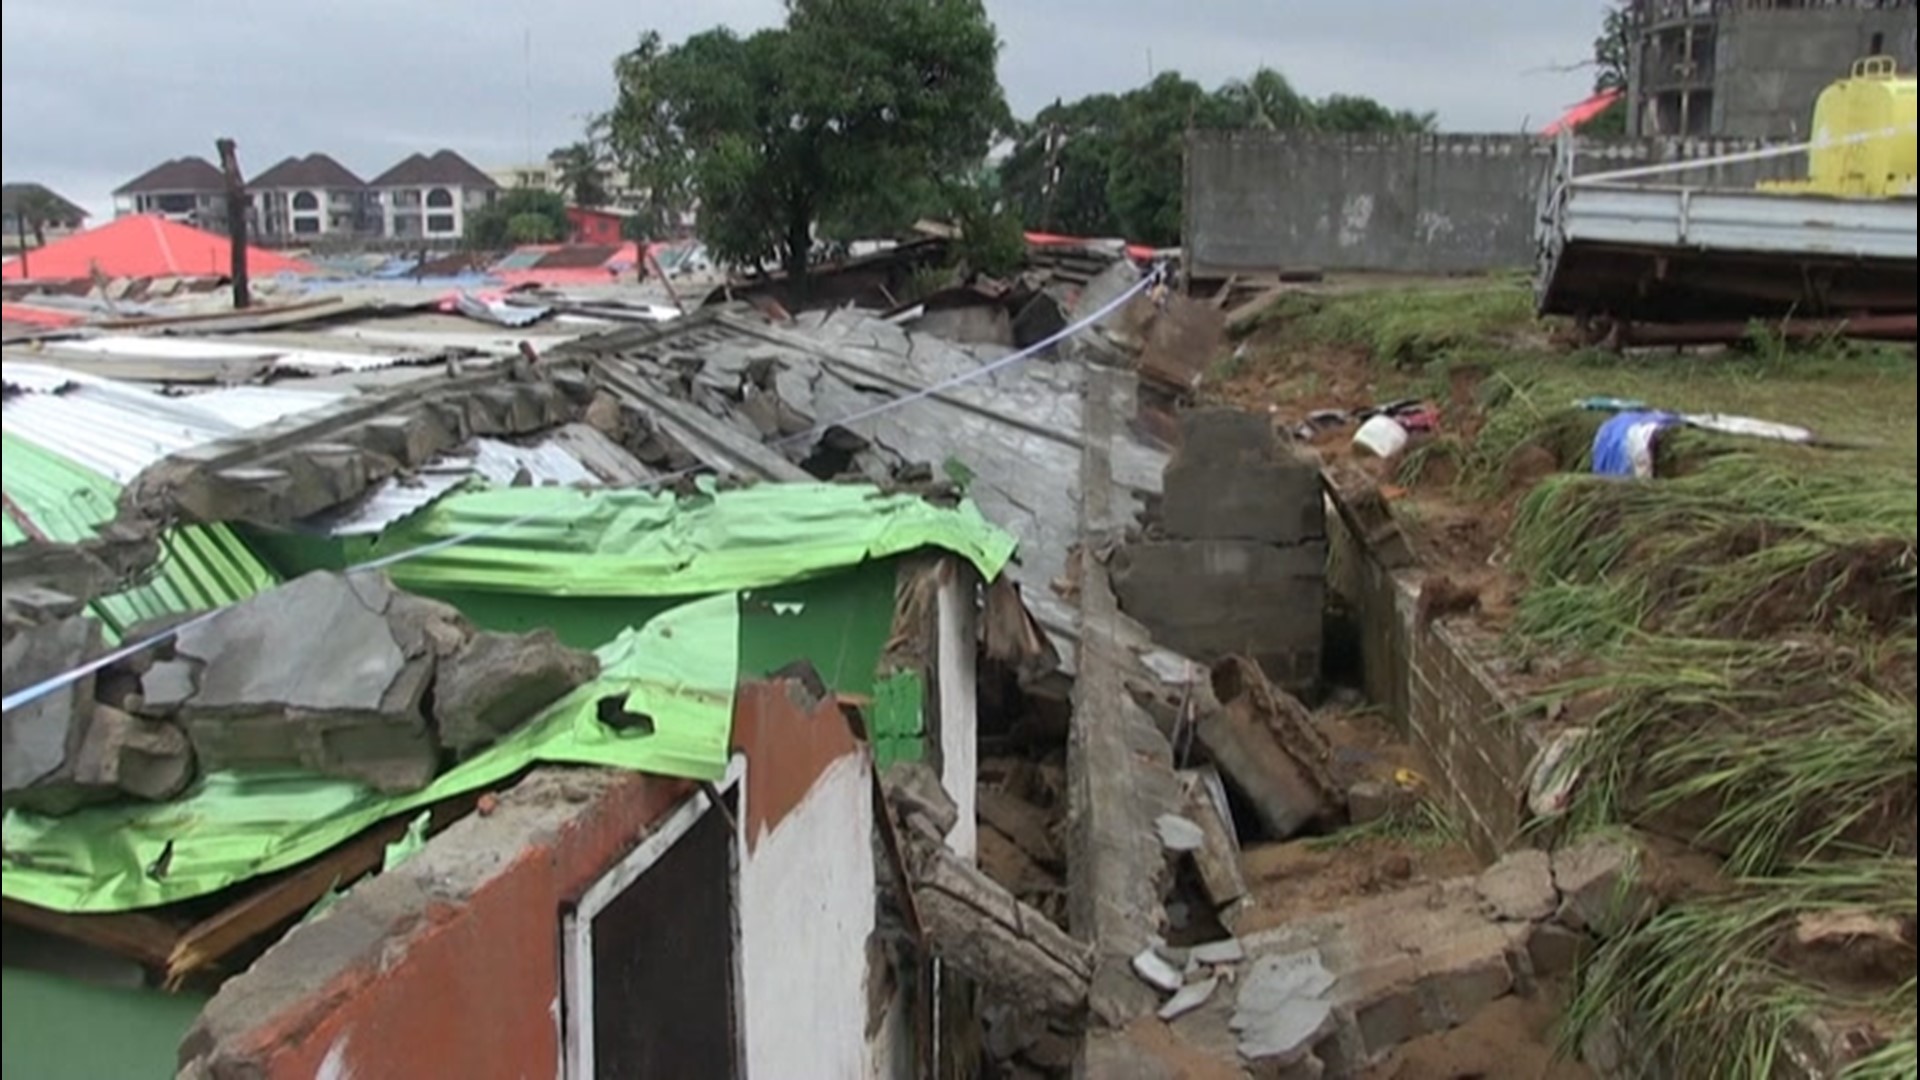 Heavy rainfall caused the fence of a water production factory in Monrovia, Liberia, to collapse on June 26. Five fatalities were reported.